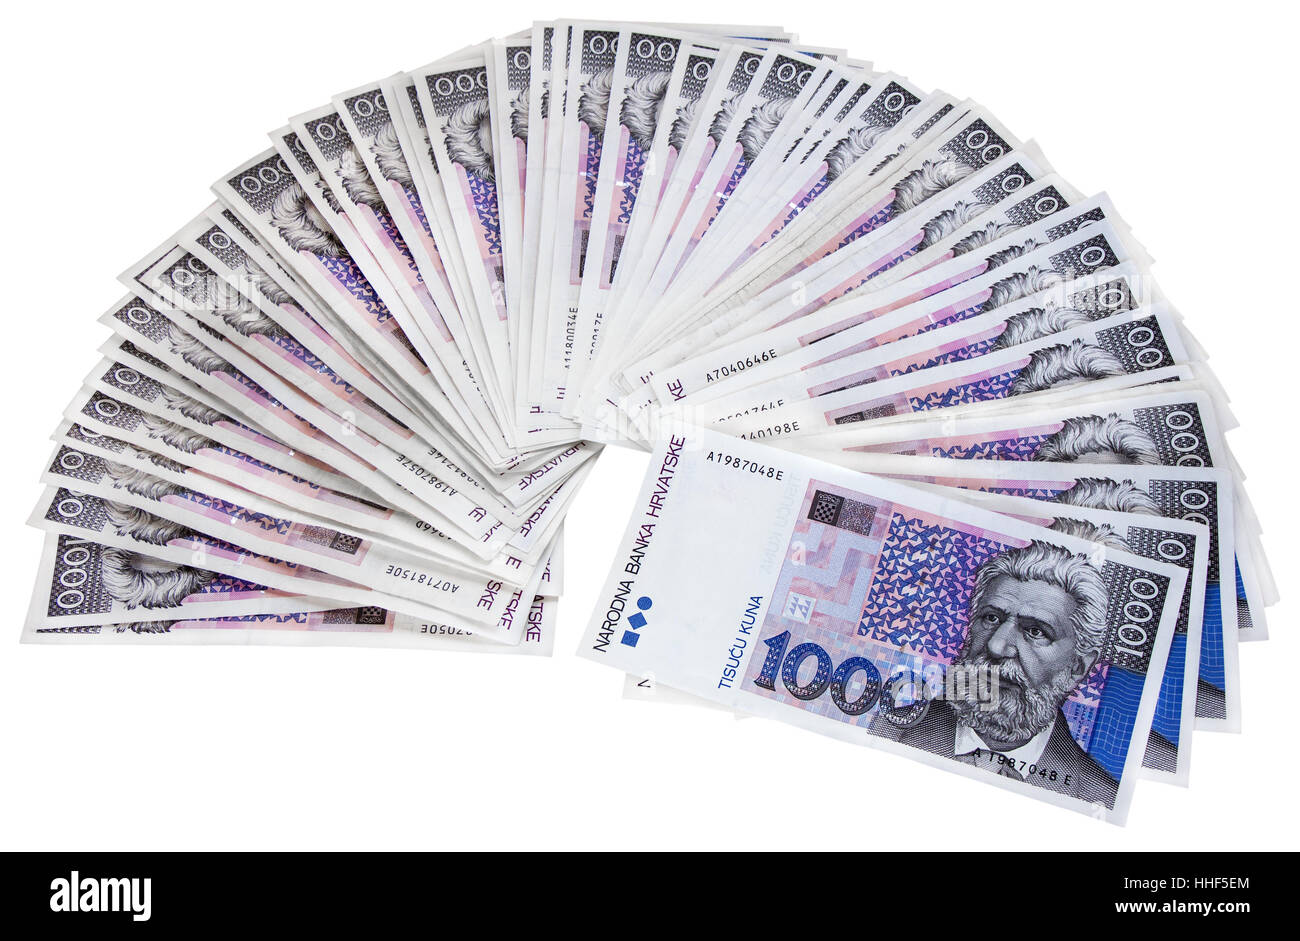 Bunch Croatian banknotes 1000 kunas isolated on white background with Clipping Path Stock Photo